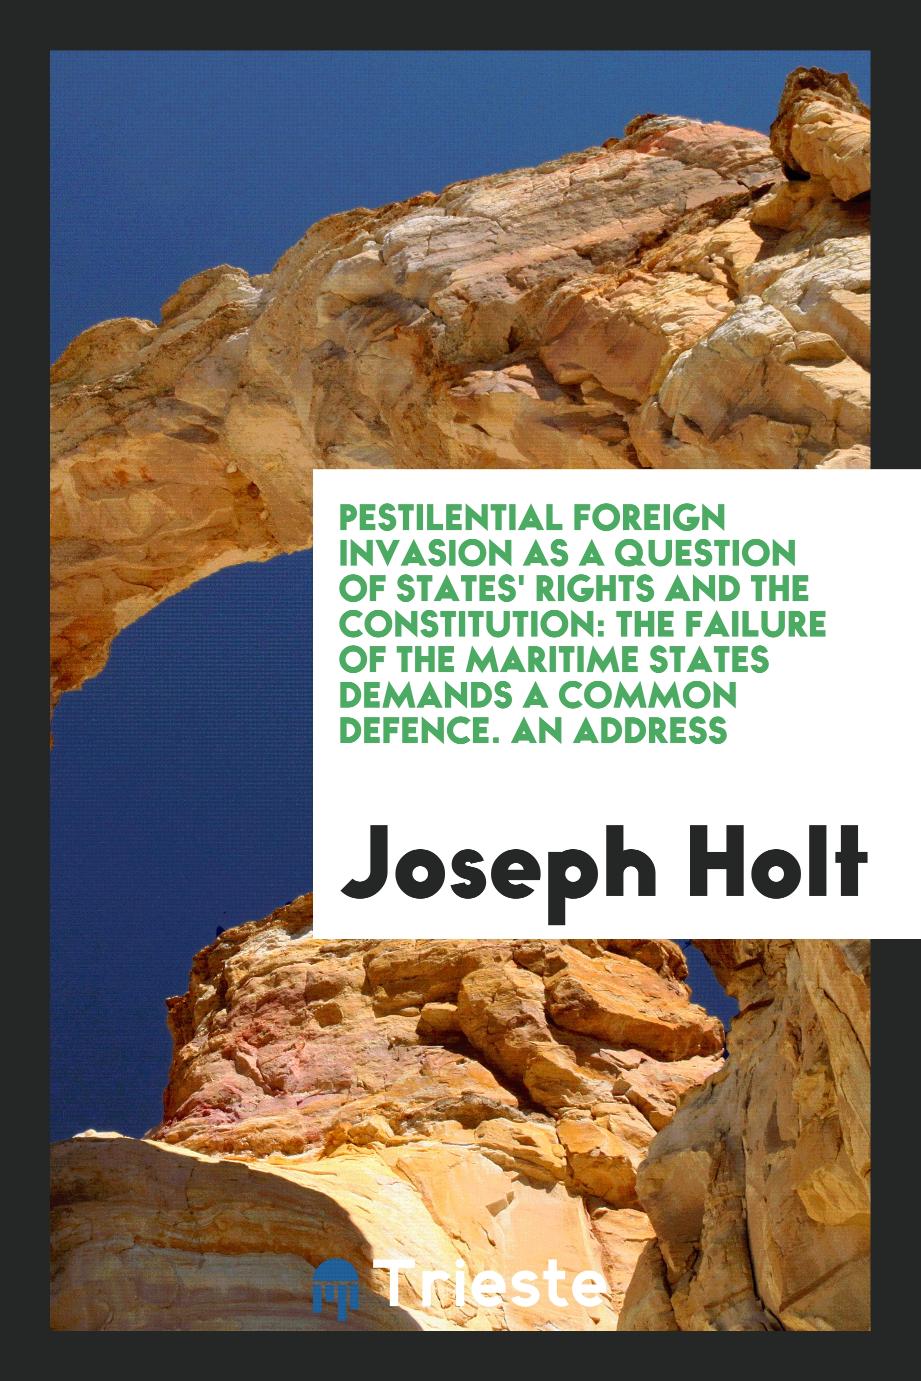 Pestilential Foreign Invasion as a Question of States' Rights and the Constitution: The Failure of the maritime states demands a common defence. An address